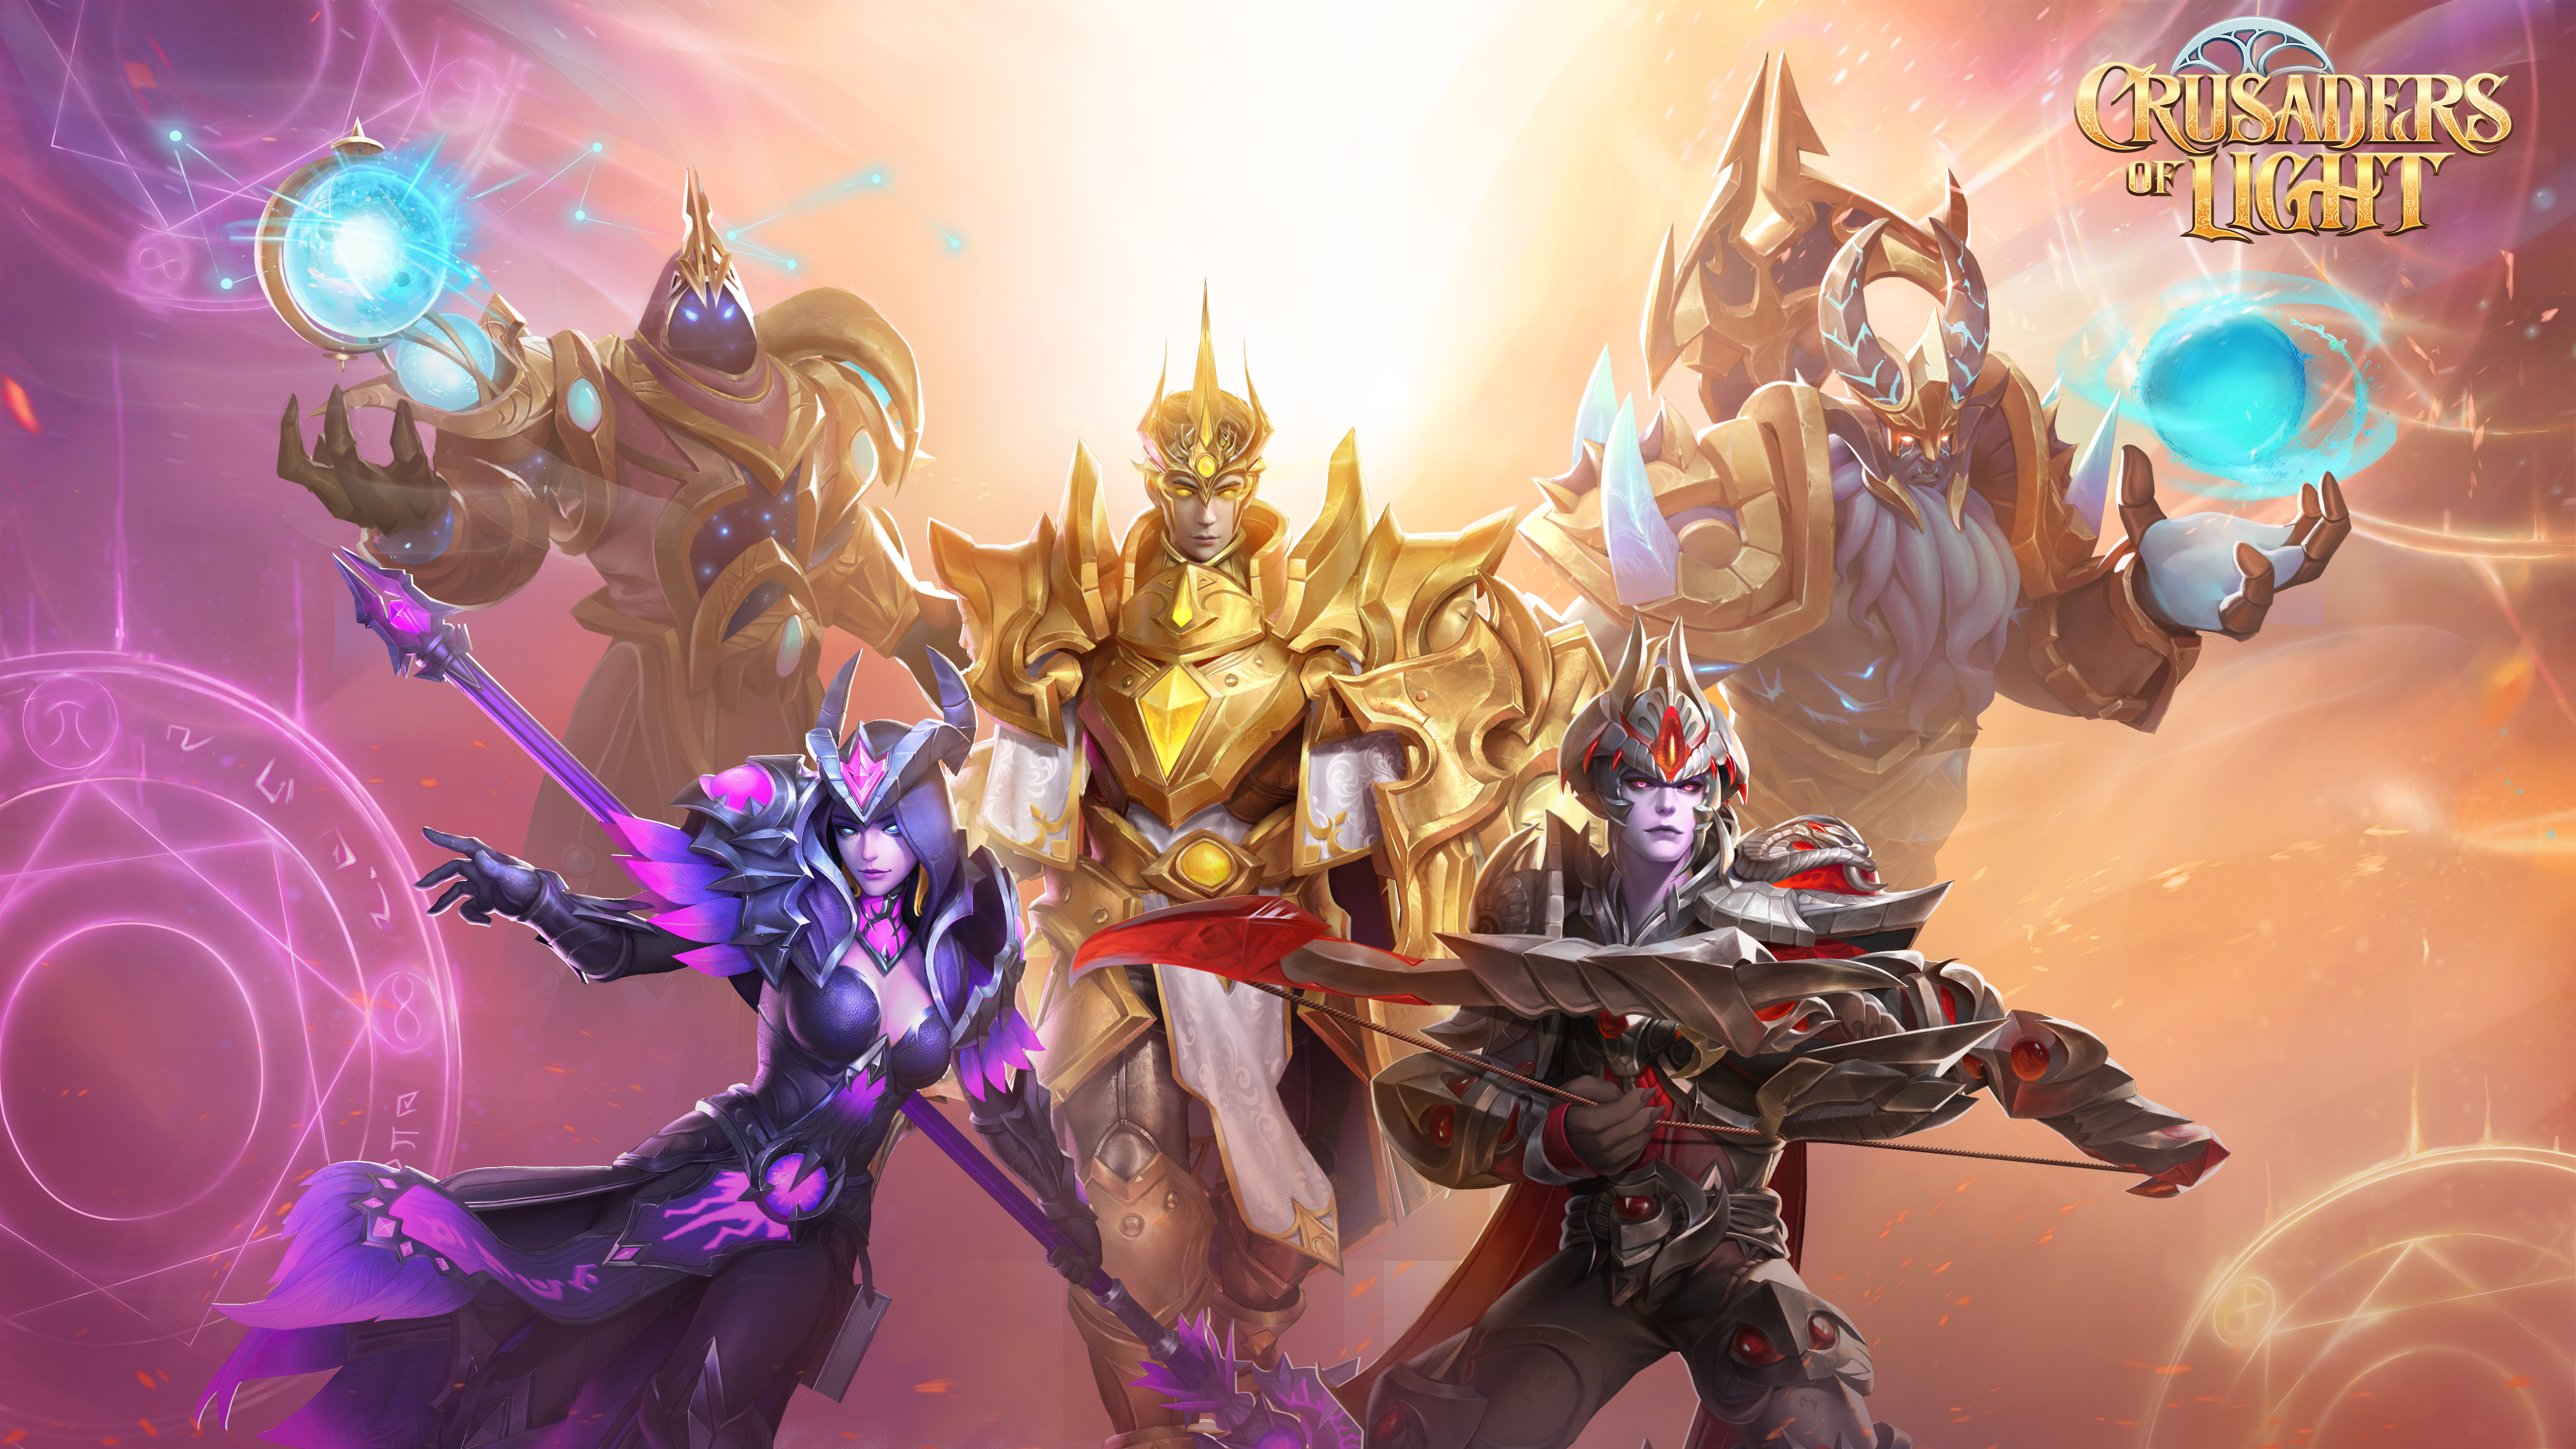 Netease Games Introduces New Playable Classes Servers And Artifact In Latest Content Update For Mmorpg Crusaders Of Light Available Now Triplepoint Newsroom